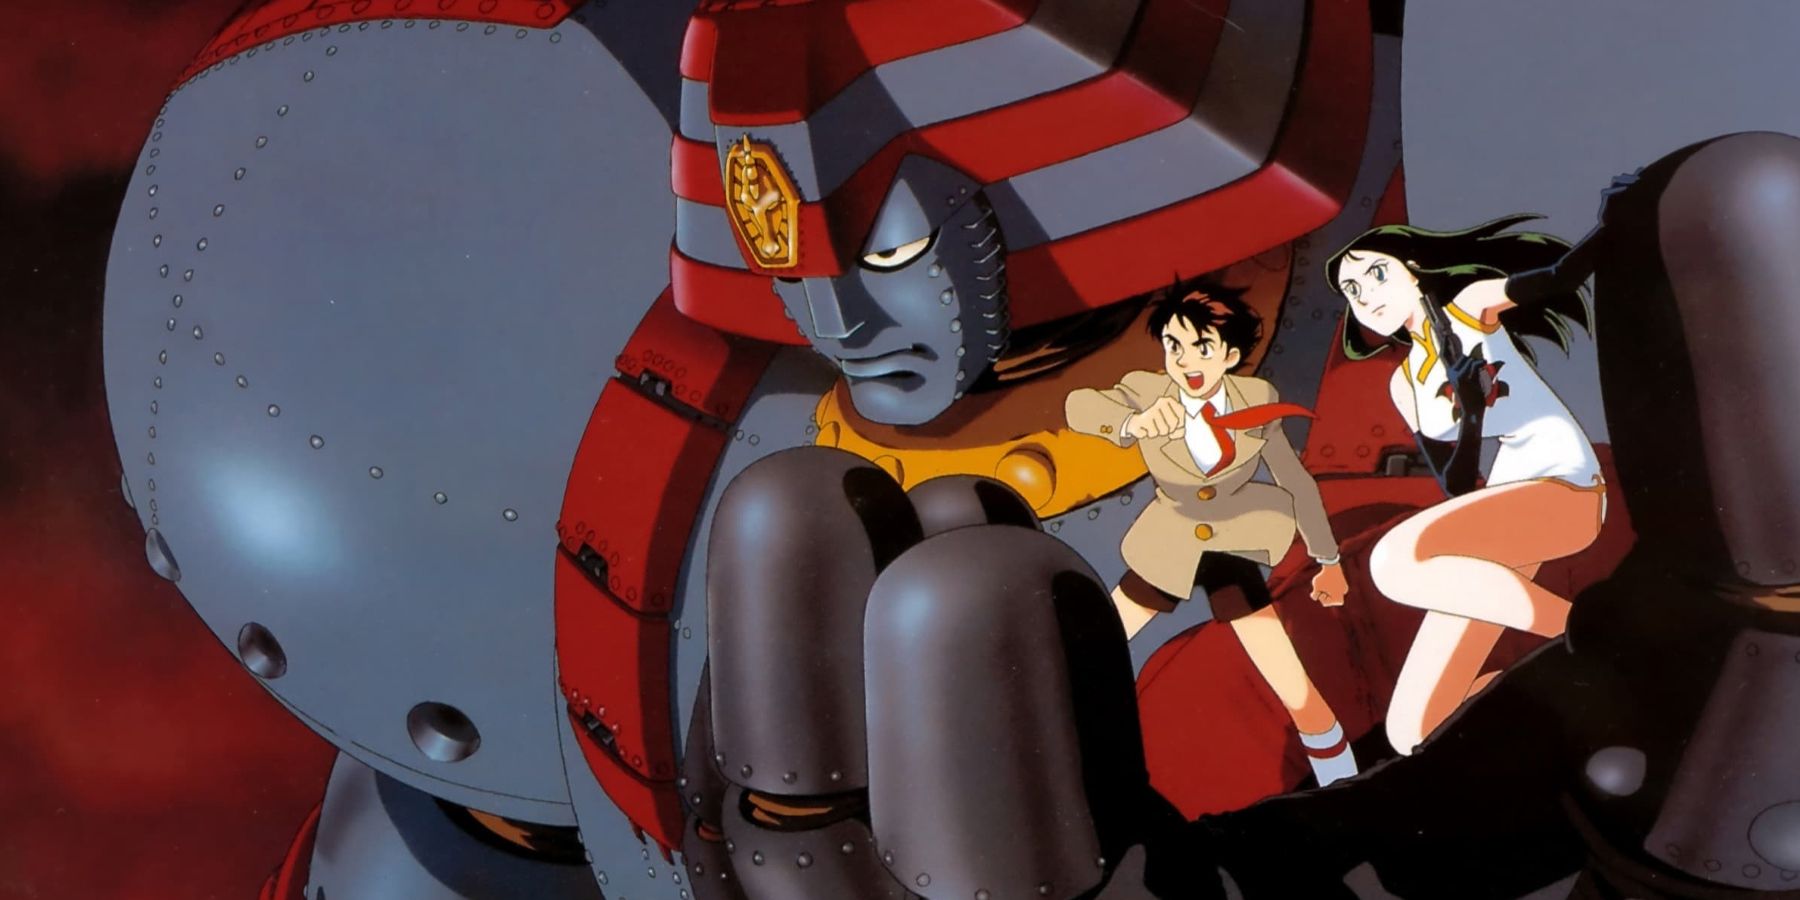 Giant Robo The Animation The Day The Earth Stood Still